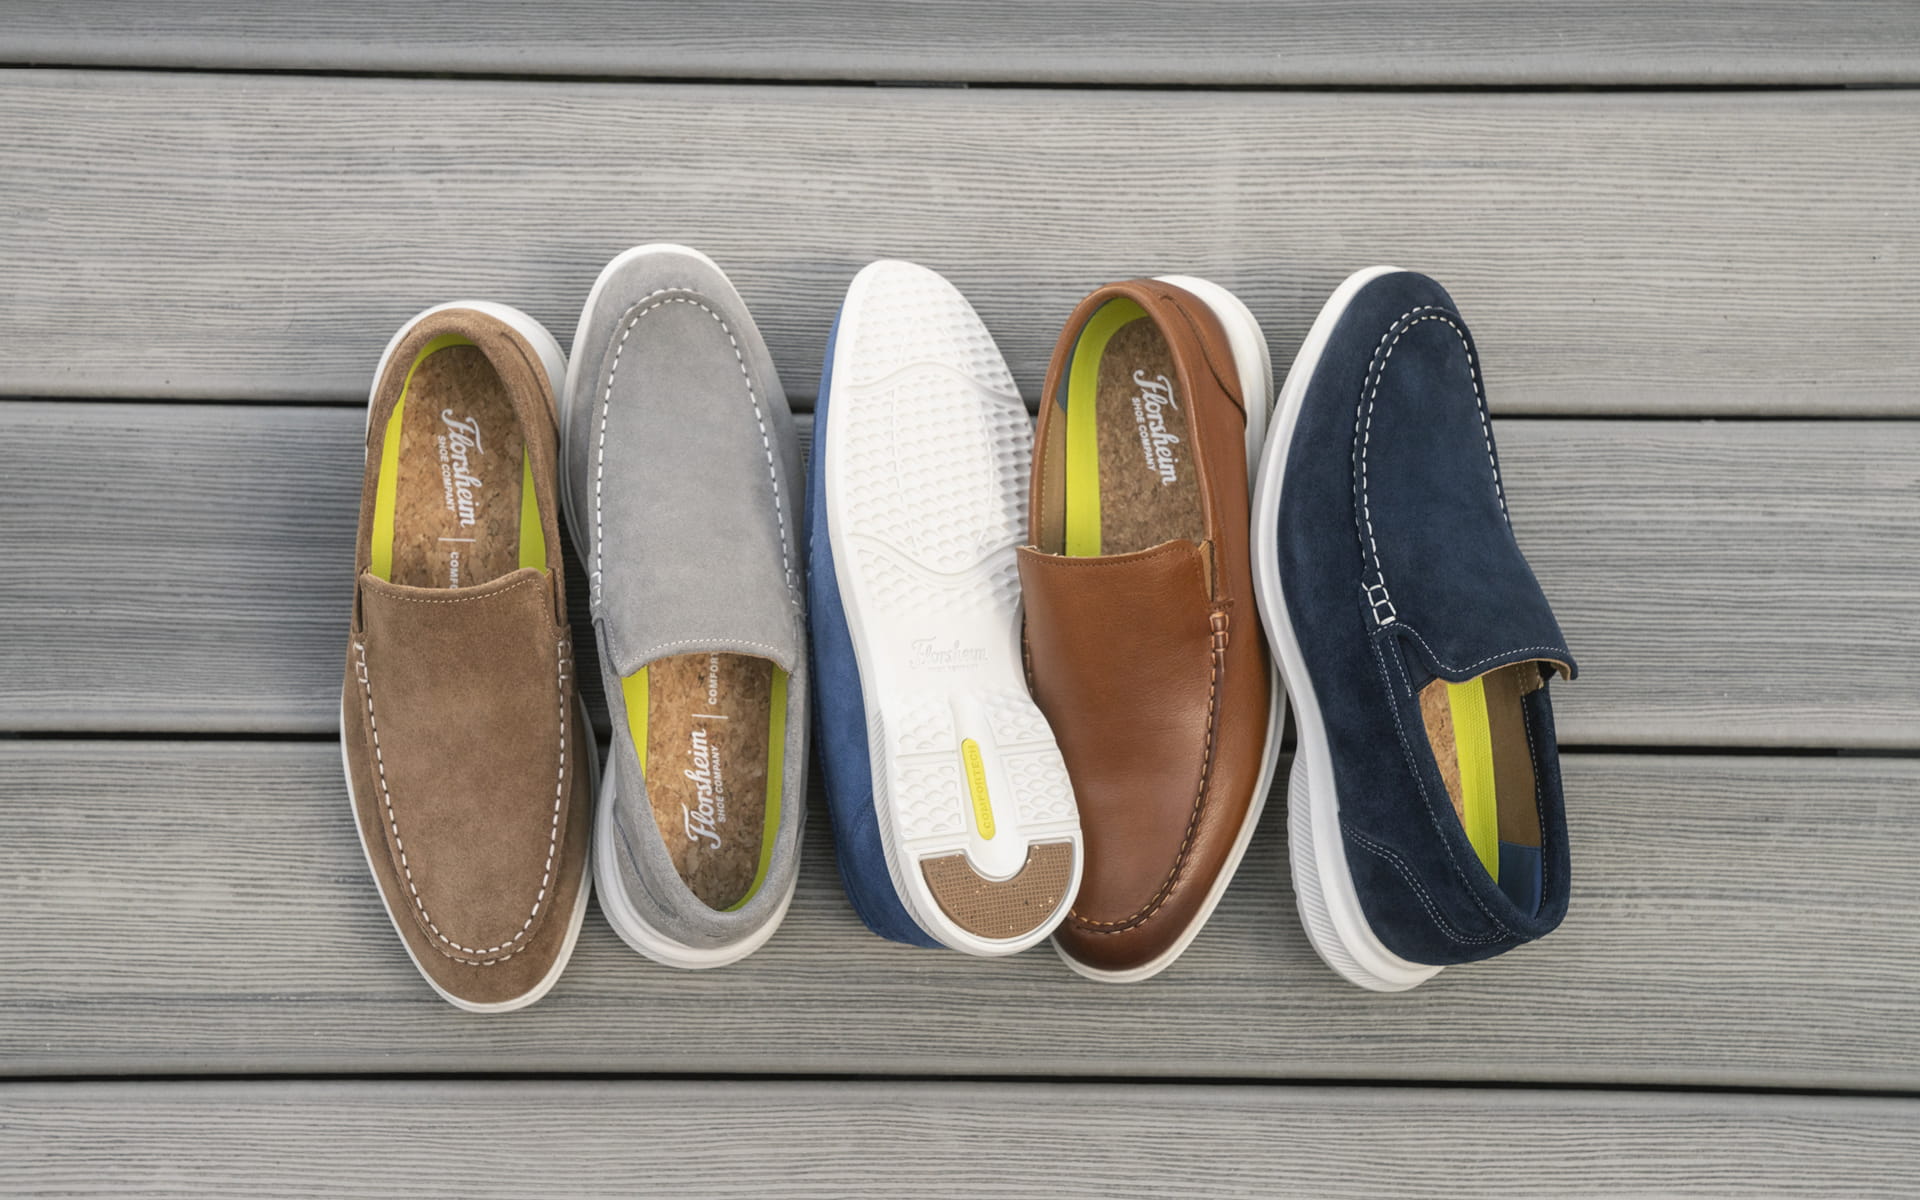 Click to shop the Florsheim Hamptons. Image features the Hamptons in a variety of colors.